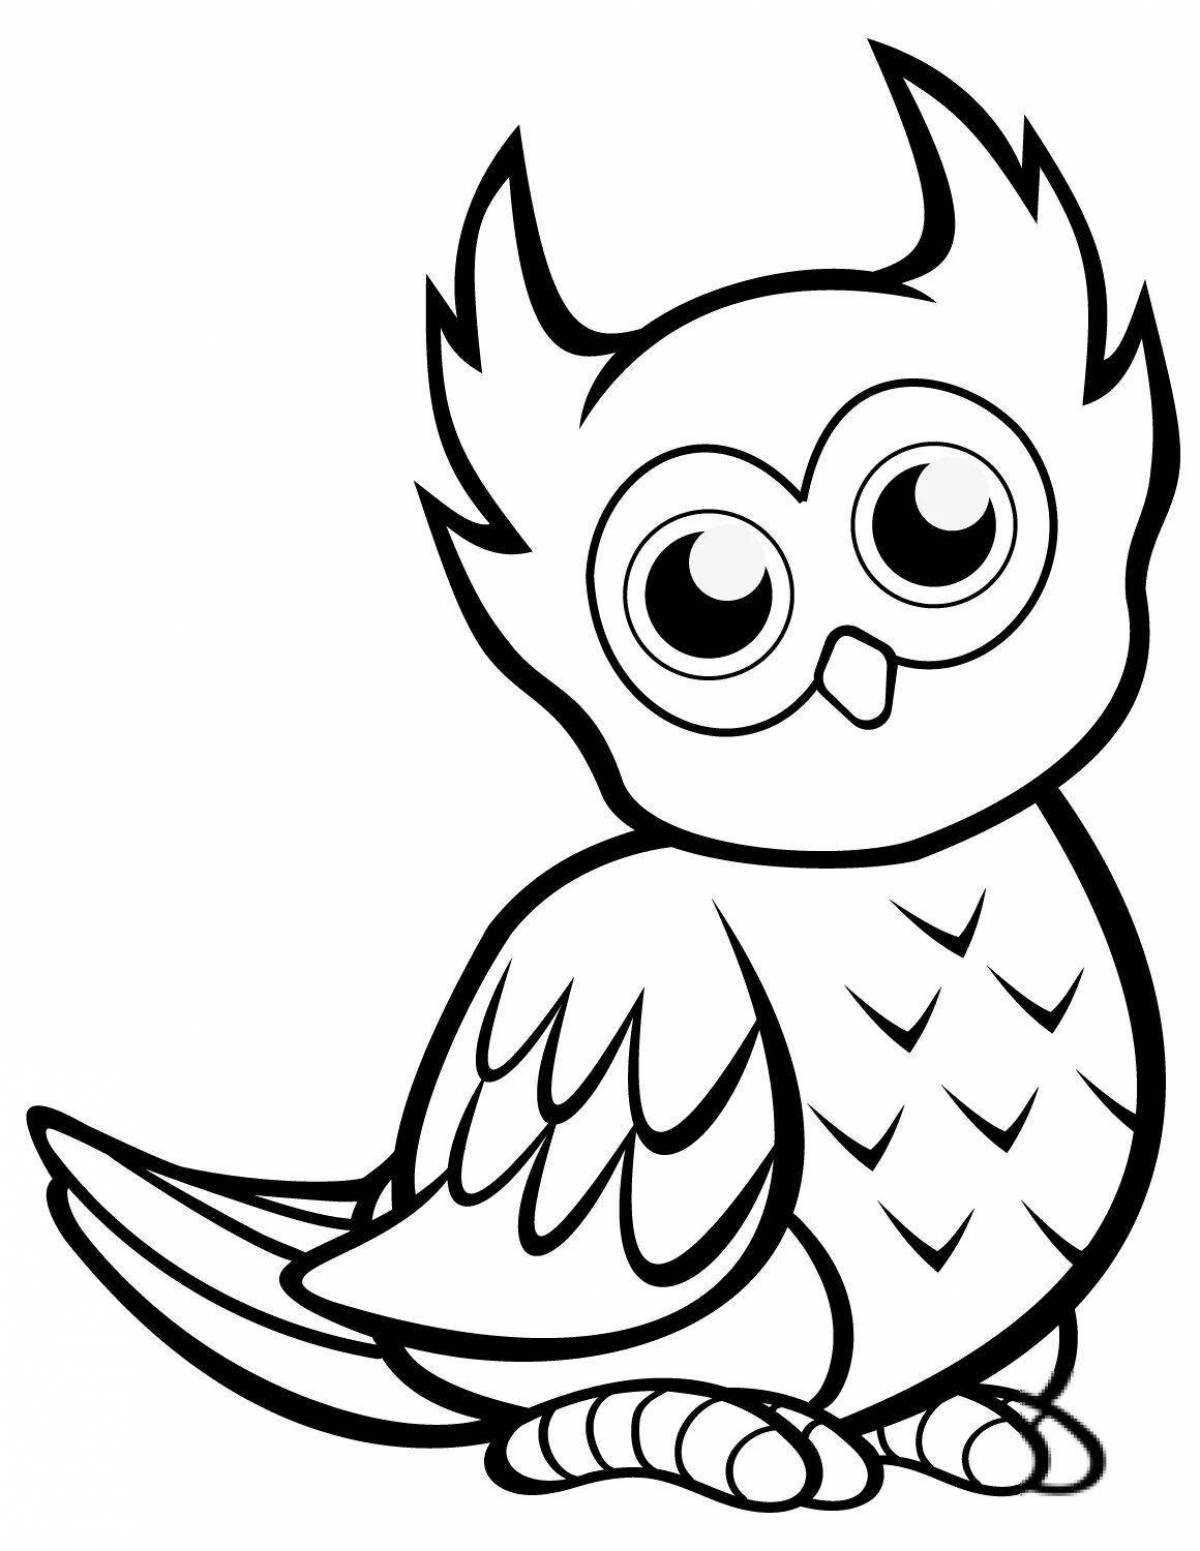 Serendipitous coloring page drawing of an owl